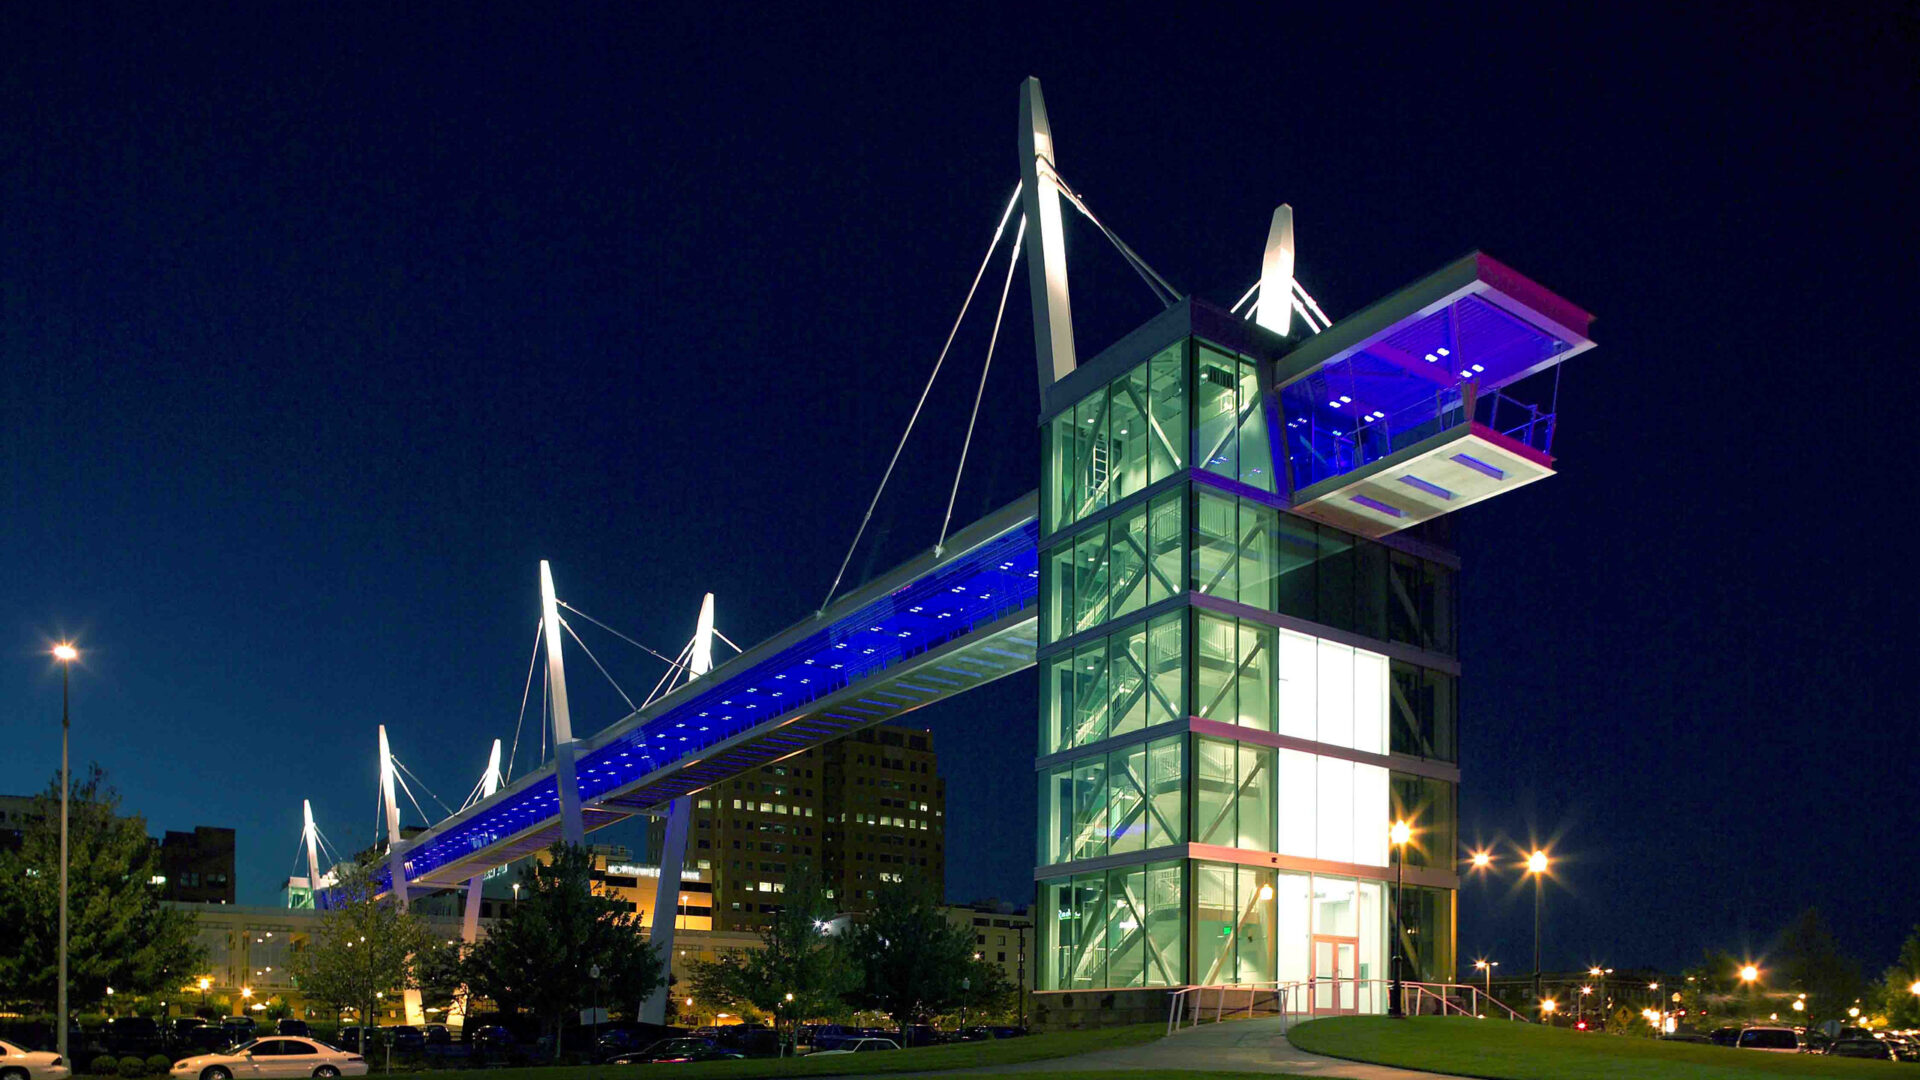 View of Davenport Skybridge at night as seen from ground level.